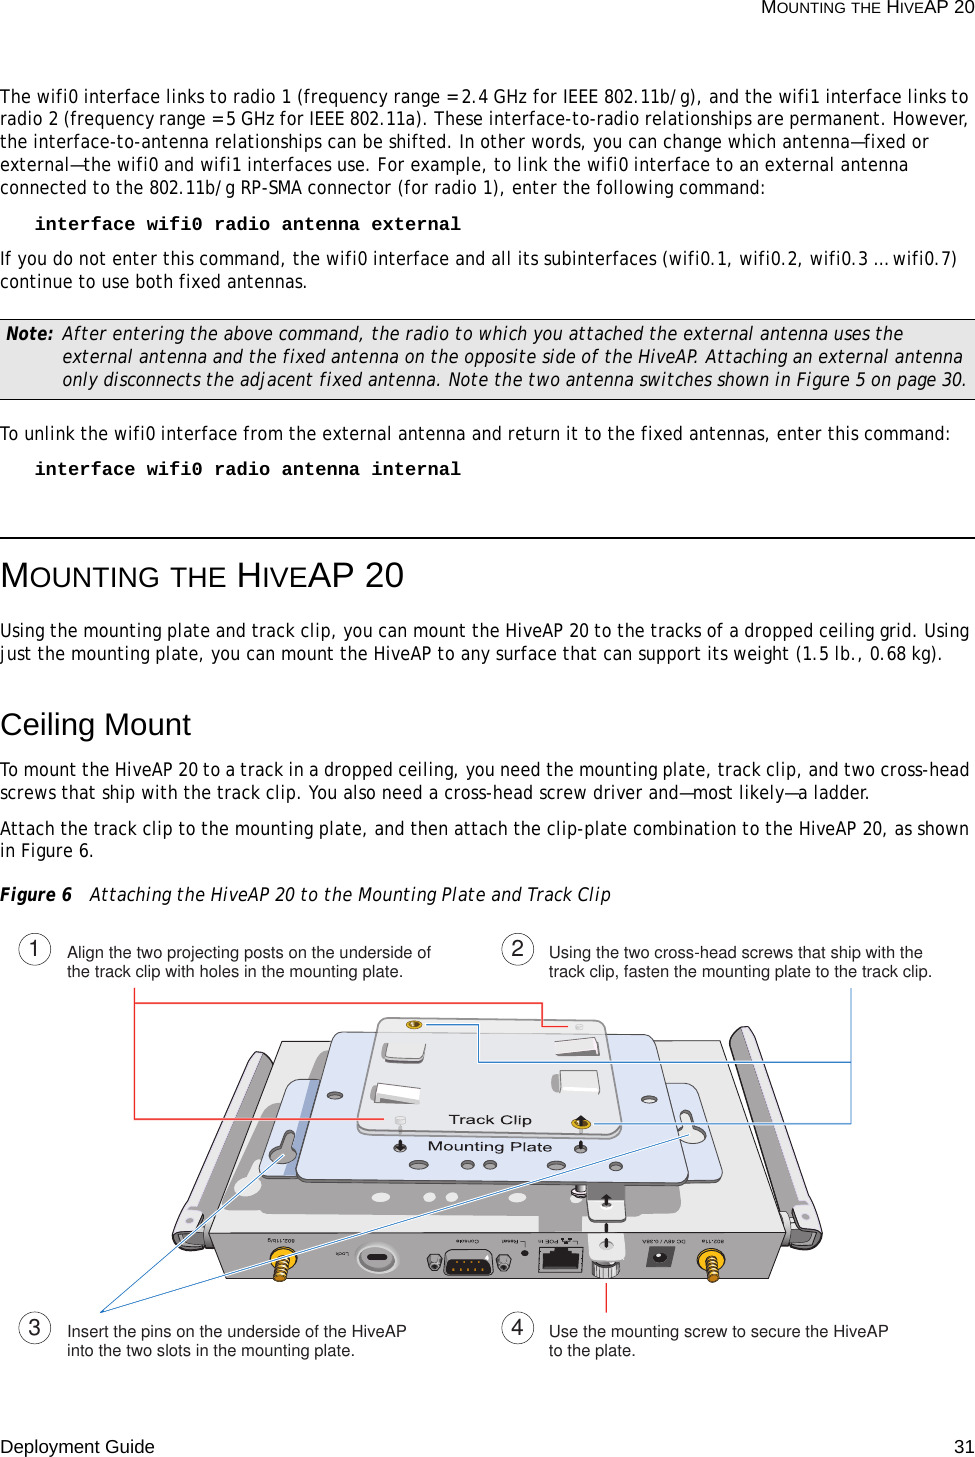 Deployment Guide 31 MOUNTING THE HIVEAP 20The wifi0 interface links to radio 1 (frequency range = 2.4 GHz for IEEE 802.11b/g), and the wifi1 interface links to radio 2 (frequency range = 5 GHz for IEEE 802.11a). These interface-to-radio relationships are permanent. However, the interface-to-antenna relationships can be shifted. In other words, you can change which antenna—fixed or external—the wifi0 and wifi1 interfaces use. For example, to link the wifi0 interface to an external antenna connected to the 802.11b/g RP-SMA connector (for radio 1), enter the following command:interface wifi0 radio antenna external If you do not enter this command, the wifi0 interface and all its subinterfaces (wifi0.1, wifi0.2, wifi0.3 … wifi0.7) continue to use both fixed antennas.To unlink the wifi0 interface from the external antenna and return it to the fixed antennas, enter this command:interface wifi0 radio antenna internalMOUNTING THE HIVEAP 20Using the mounting plate and track clip, you can mount the HiveAP 20 to the tracks of a dropped ceiling grid. Using just the mounting plate, you can mount the HiveAP to any surface that can support its weight (1.5 lb., 0.68 kg).Ceiling MountTo mount the HiveAP 20 to a track in a dropped ceiling, you need the mounting plate, track clip, and two cross-head screws that ship with the track clip. You also need a cross-head screw driver and—most likely—a ladder.Attach the track clip to the mounting plate, and then attach the clip-plate combination to the HiveAP 20, as shown in Figure 6.Figure 6  Attaching the HiveAP 20 to the Mounting Plate and Track ClipNote: After entering the above command, the radio to which you attached the external antenna uses the external antenna and the fixed antenna on the opposite side of the HiveAP. Attaching an external antenna only disconnects the adjacent fixed antenna. Note the two antenna switches shown in Figure 5 on page 30.Align the two projecting posts on the underside of the track clip with holes in the mounting plate. Using the two cross-head screws that ship with the track clip, fasten the mounting plate to the track clip.Insert the pins on the underside of the HiveAP into the two slots in the mounting plate. Use the mounting screw to secure the HiveAP to the plate.1234